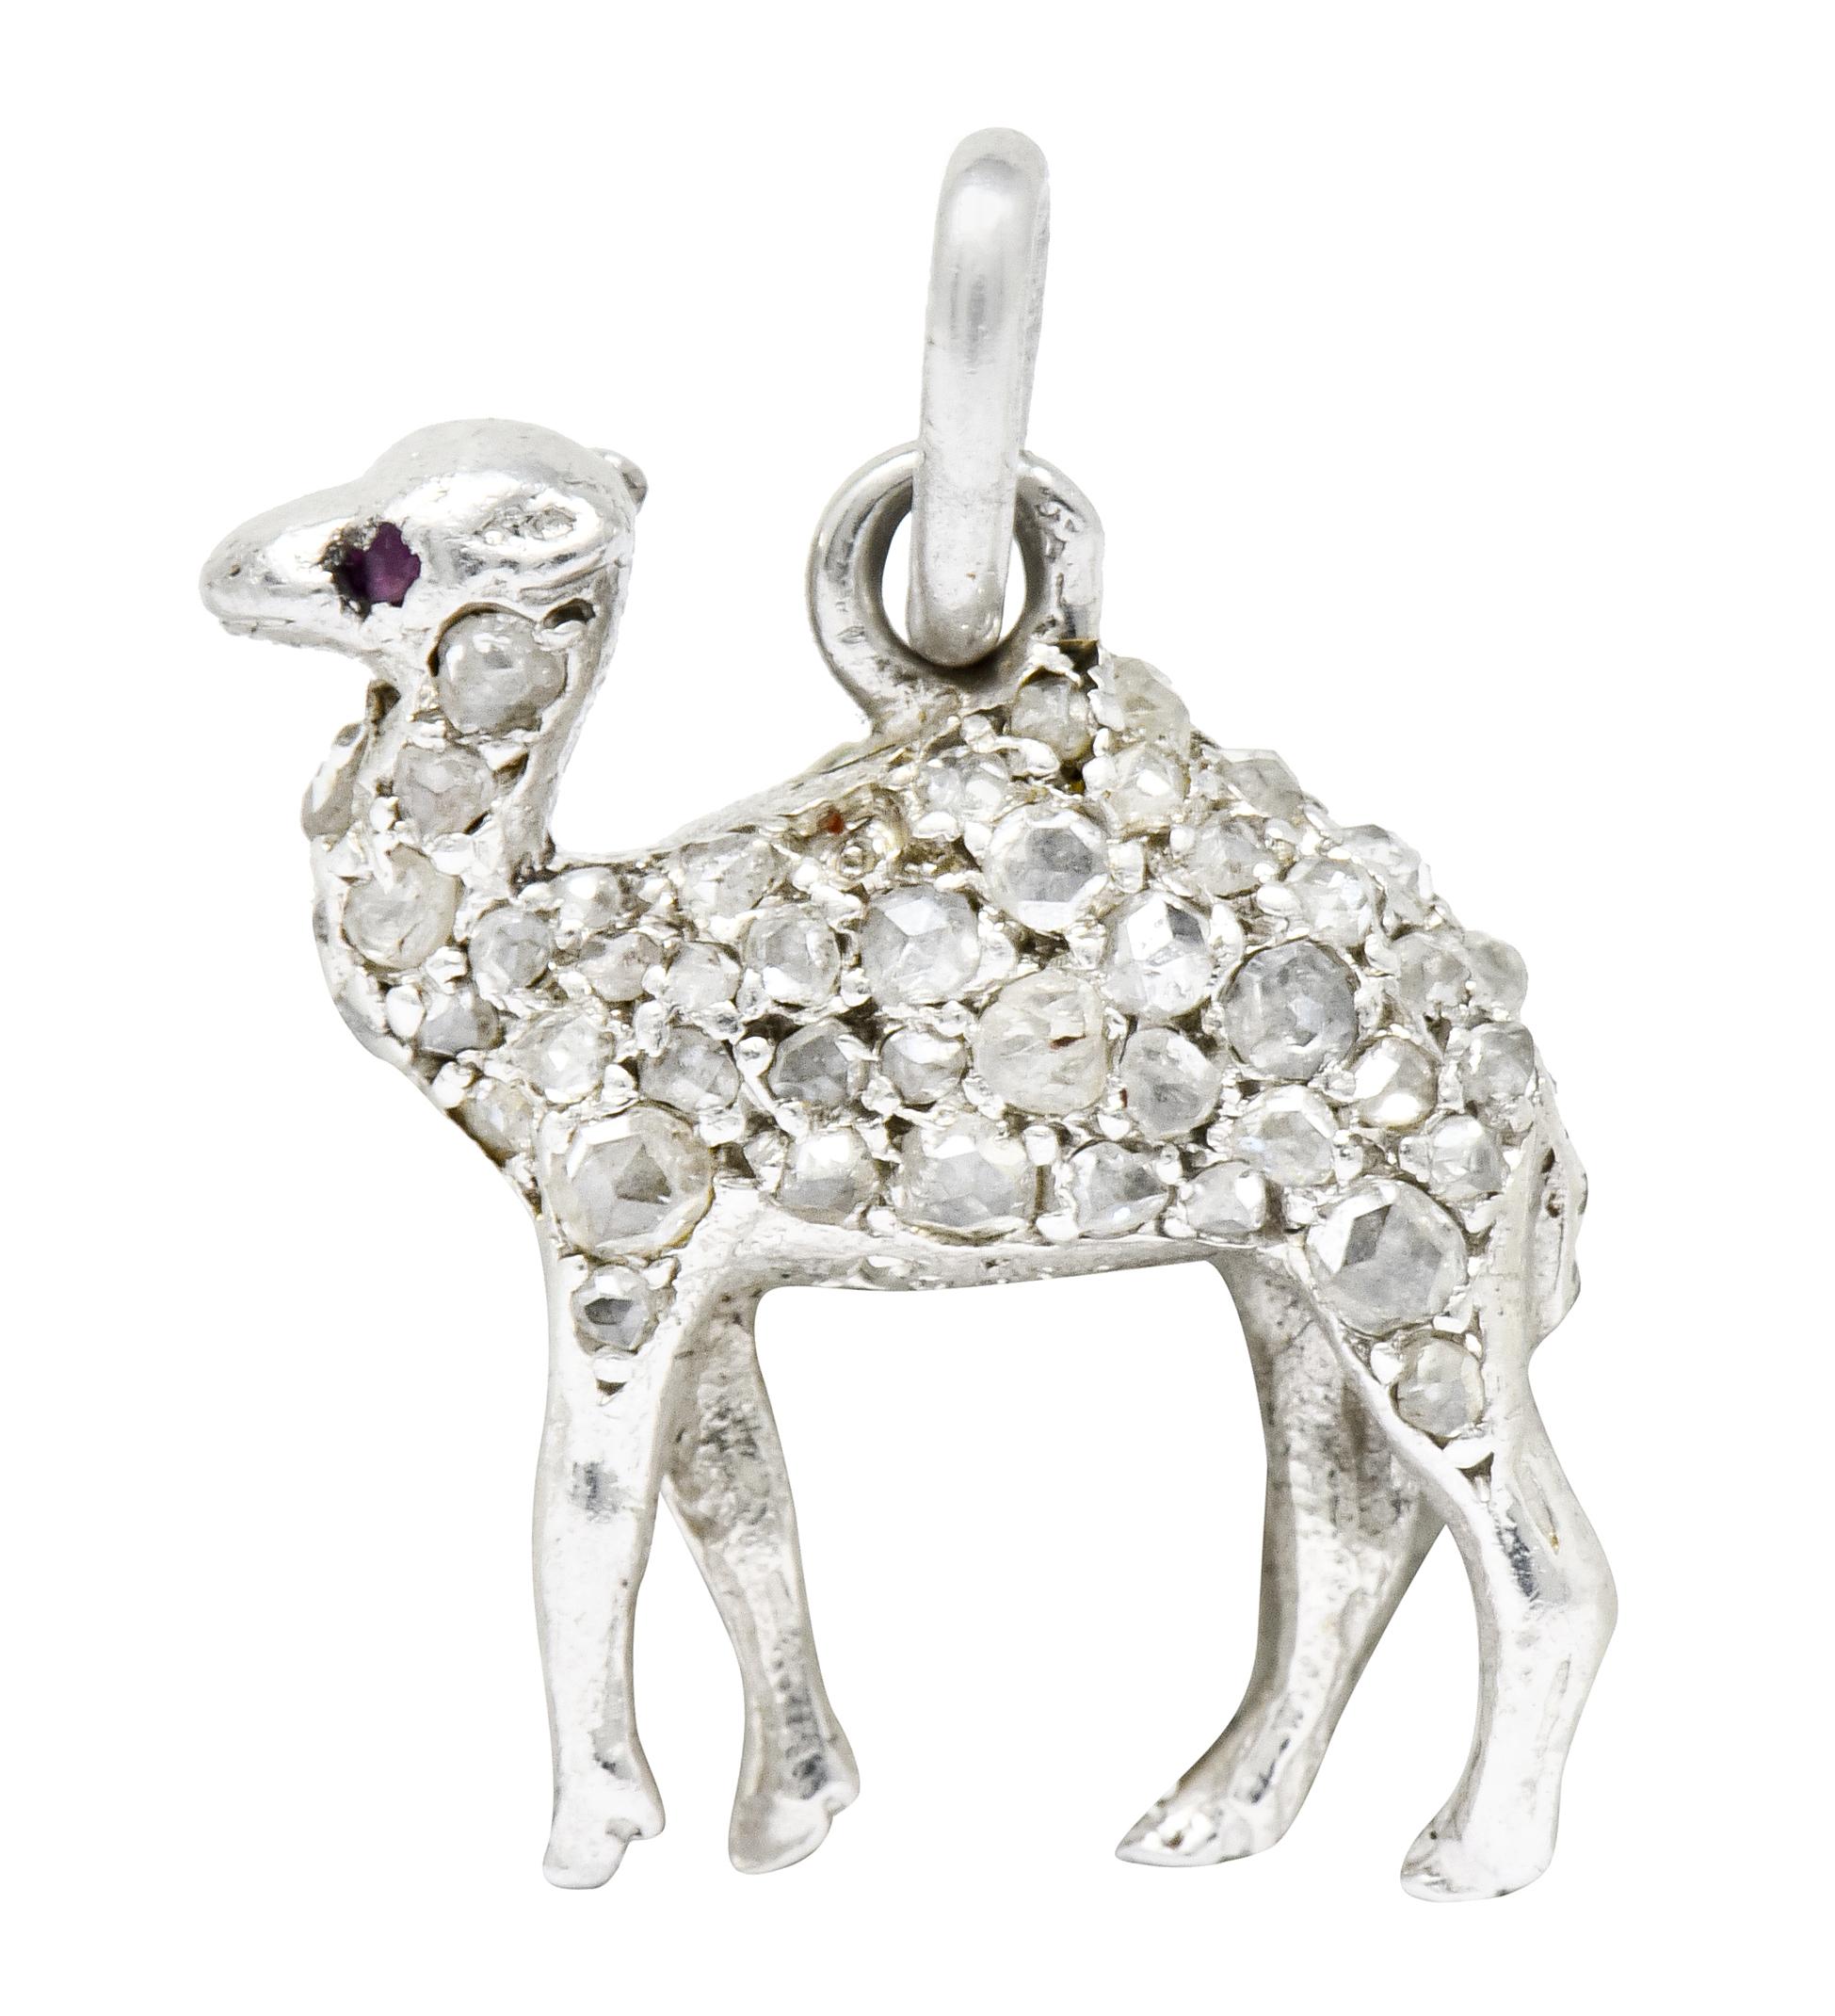 Designed as a jauntily walking camel with its head held high and ruby accent eyes

Pavé set throughout with rose cut diamonds of varied size and color

Completed by jump ring bale

Tested as platinum

Fully signed Cartier with French assay